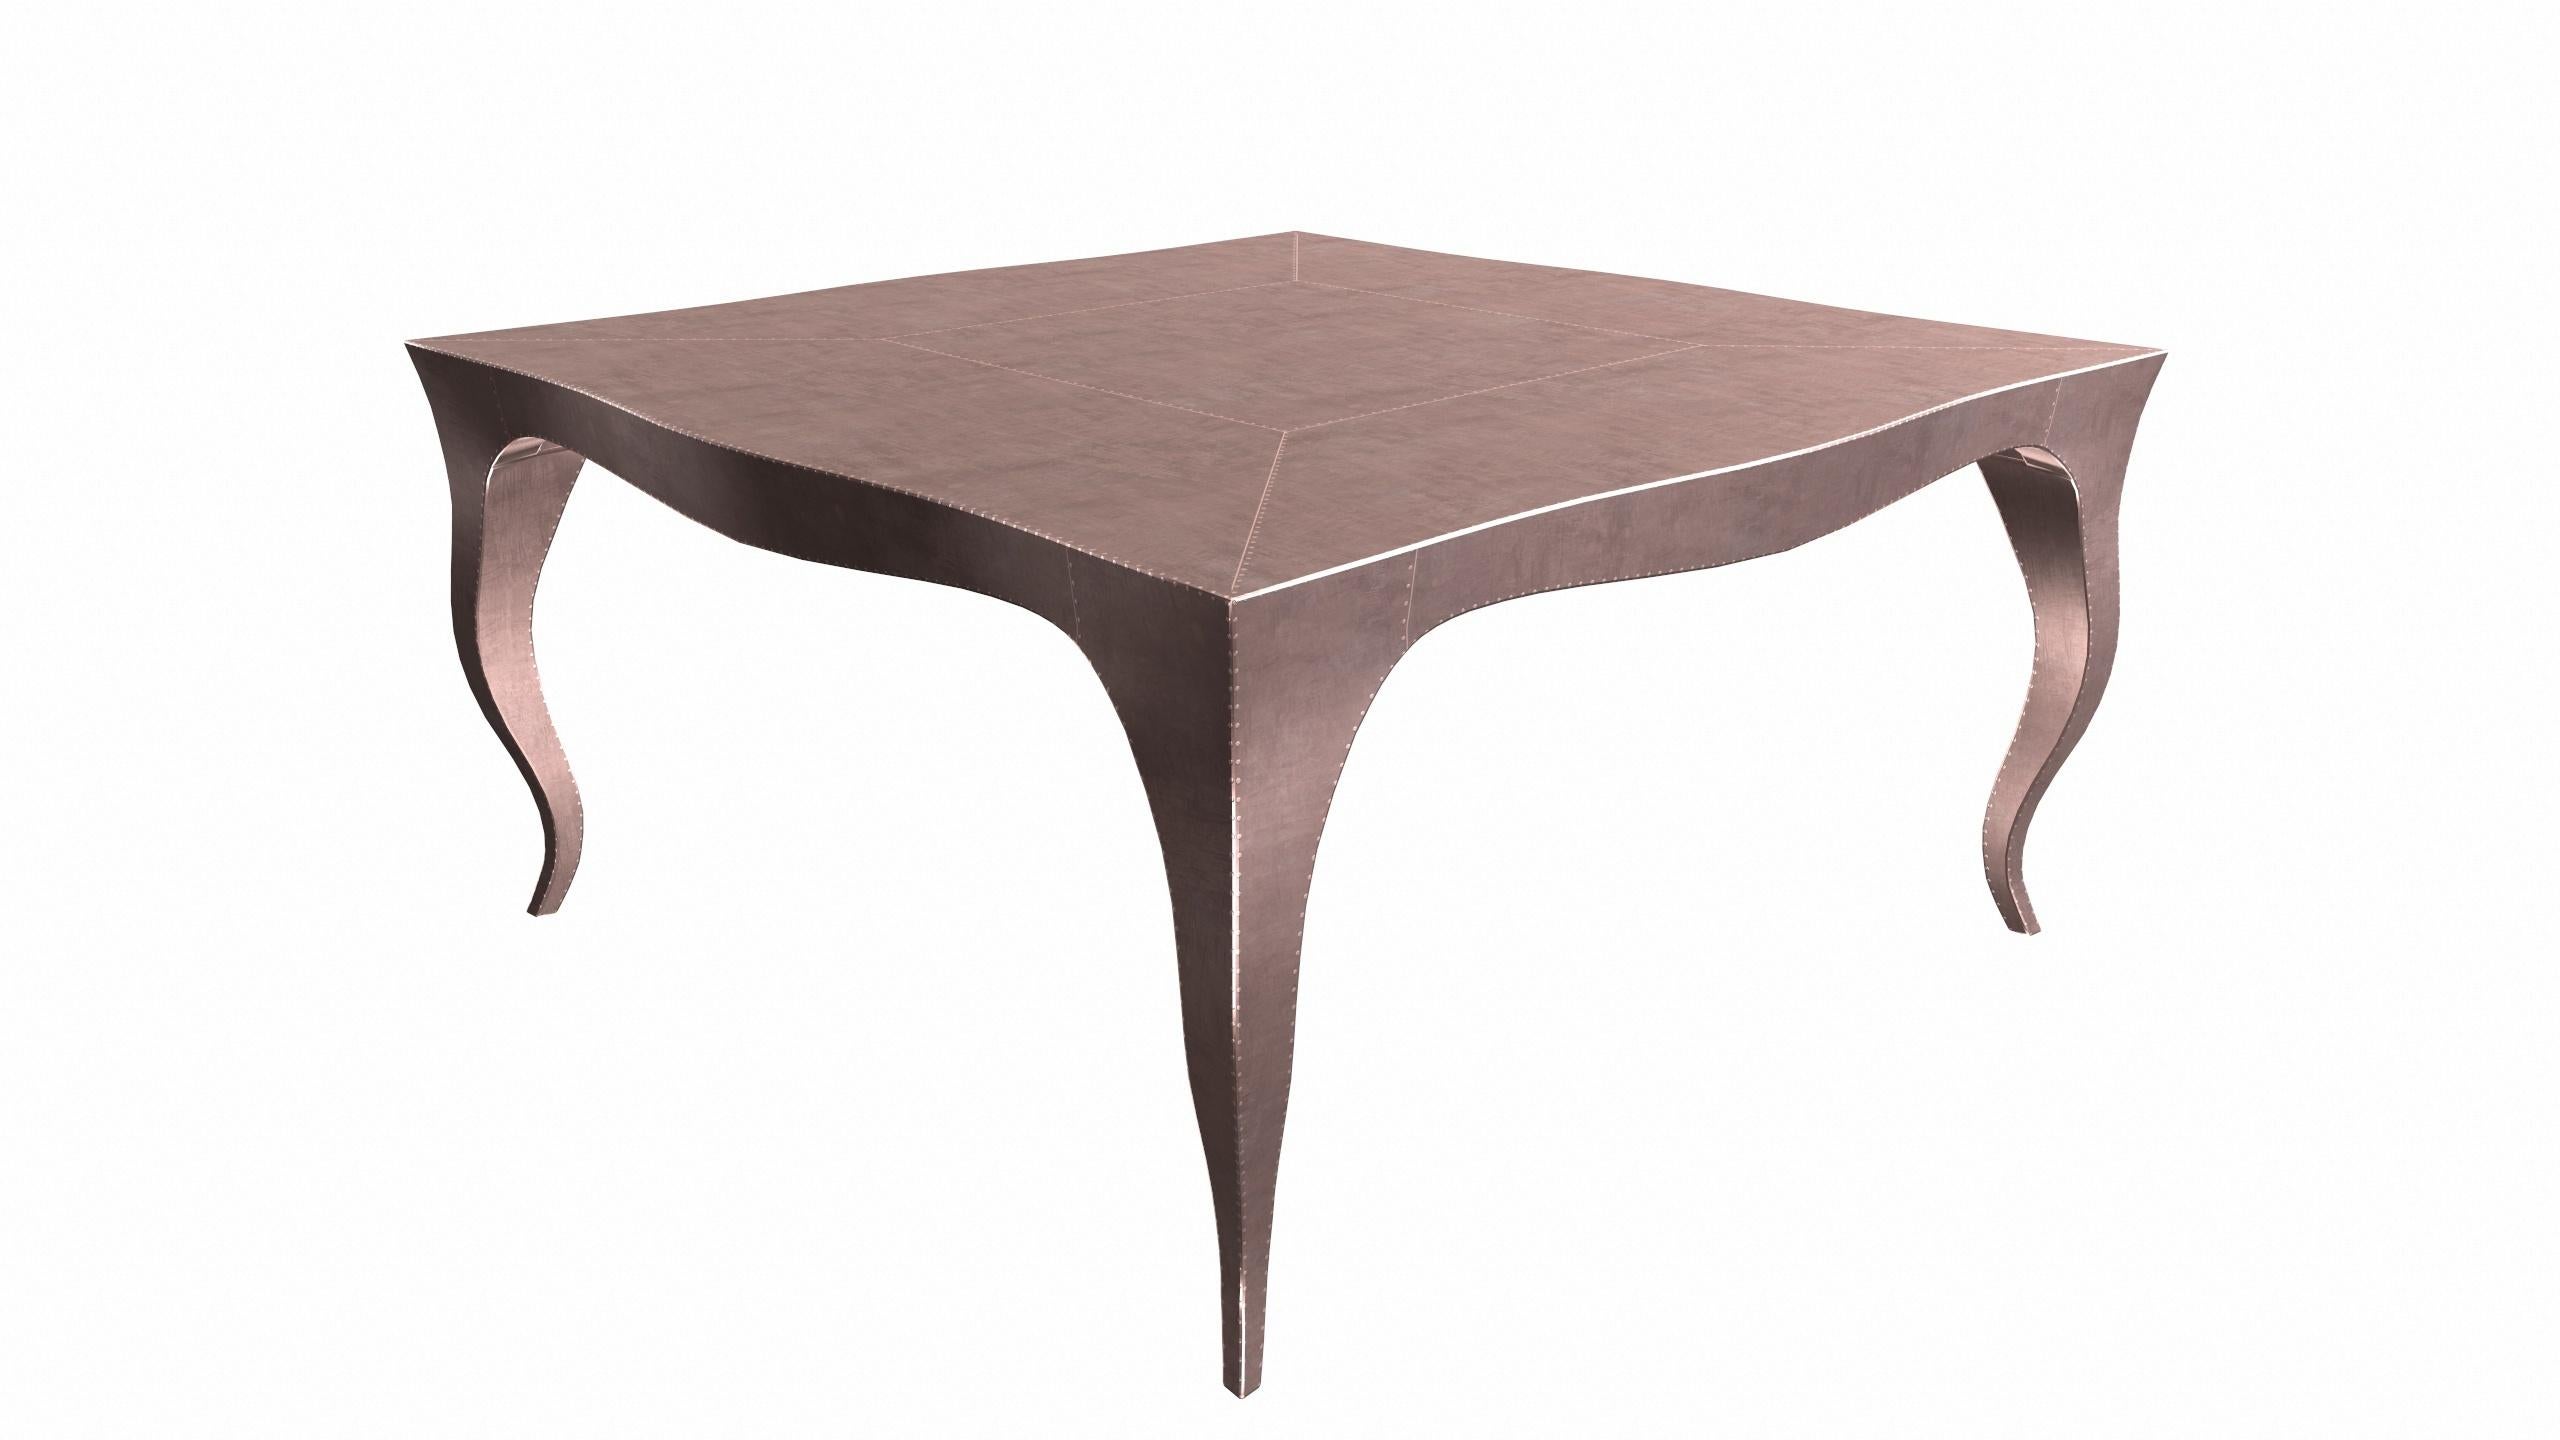 American Louise Art Deco Center Tables Smooth Copper by Paul Mathieu for S. Odegard For Sale